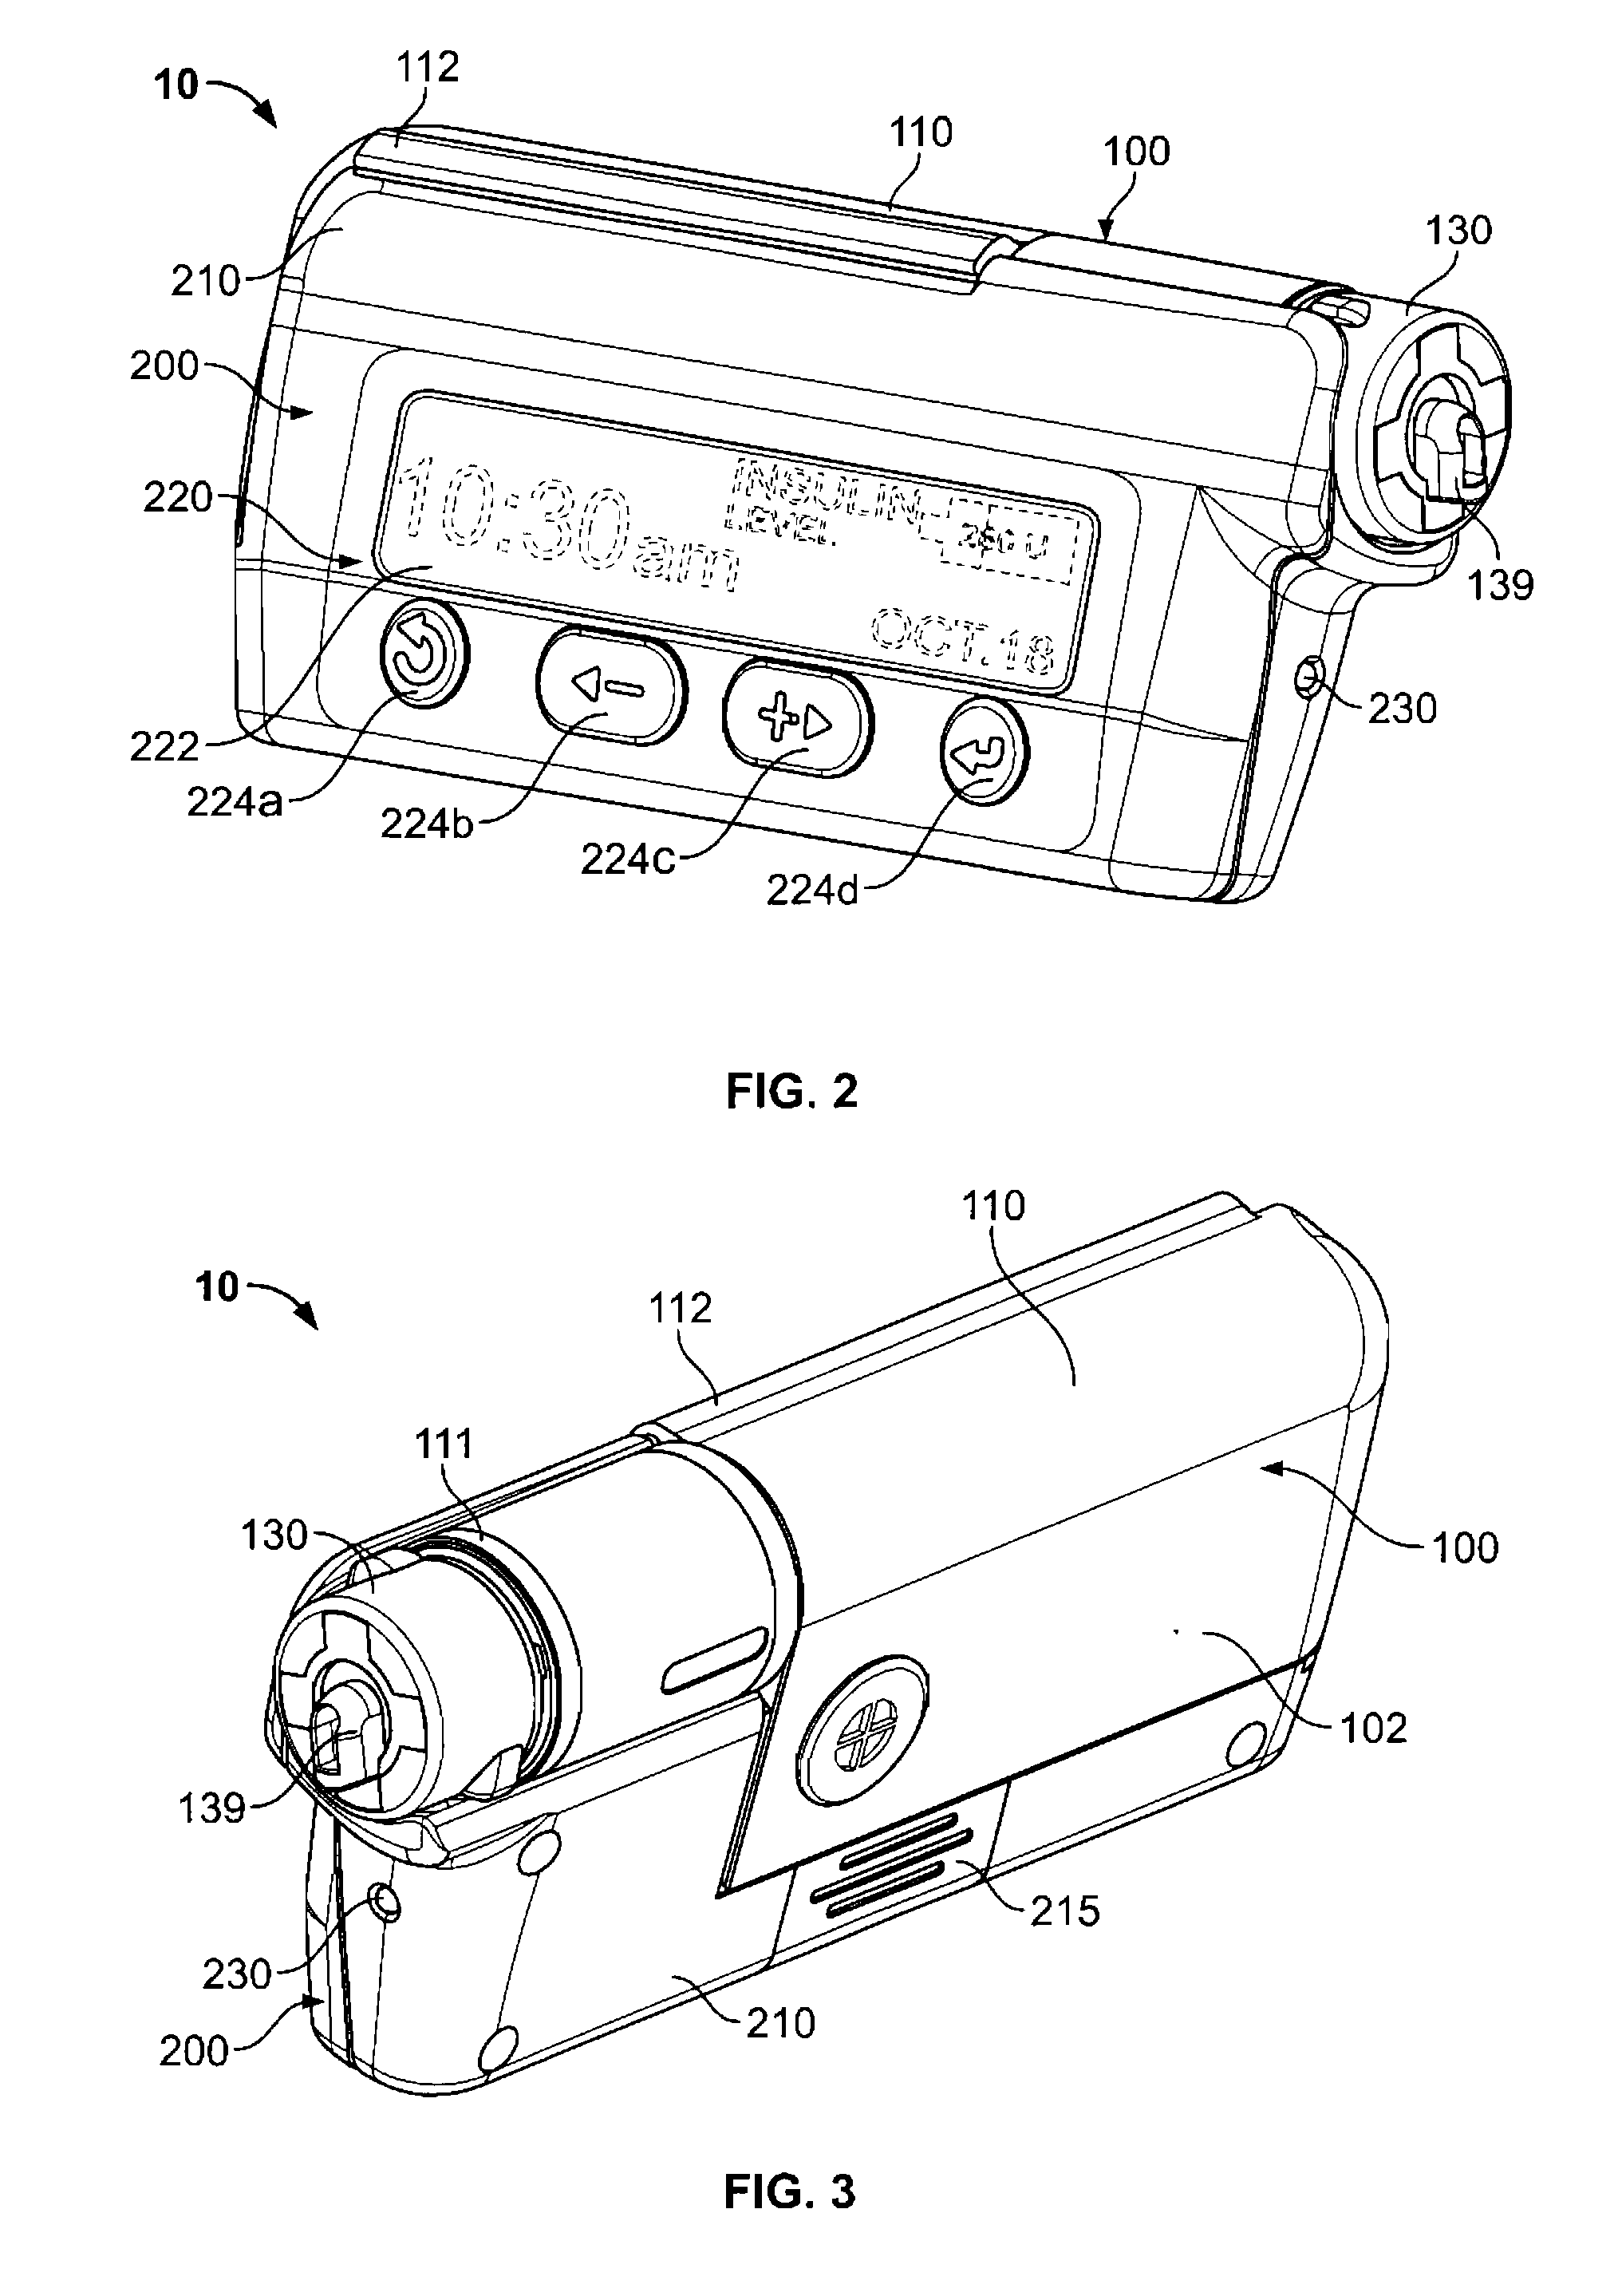 User Profile Backup System For an Infusion Pump Device